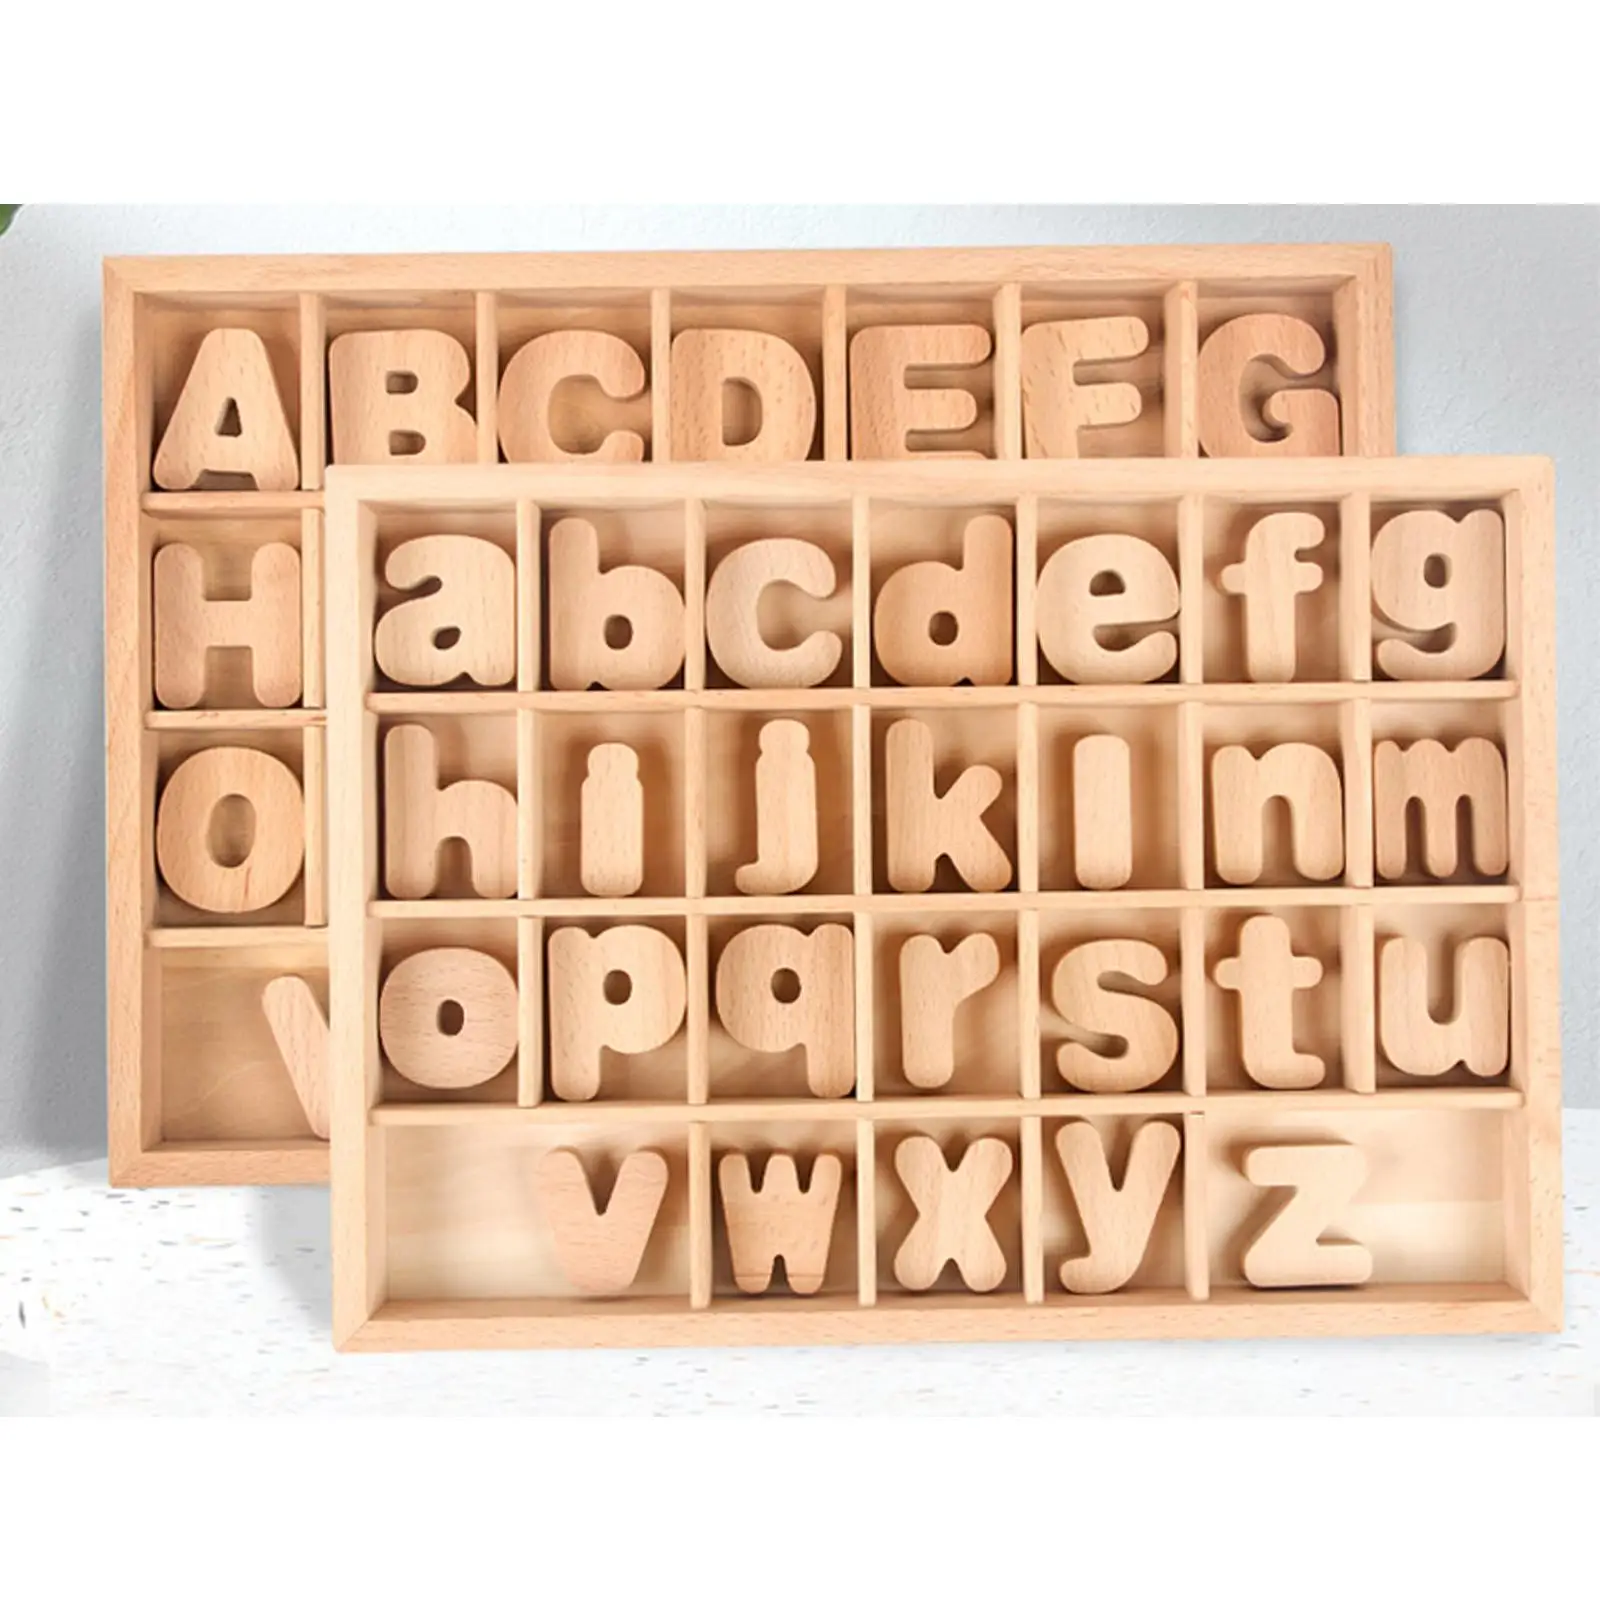 Alphabet Letter Blocks Montessori Toys with Sorting Box for Toddlers Baby